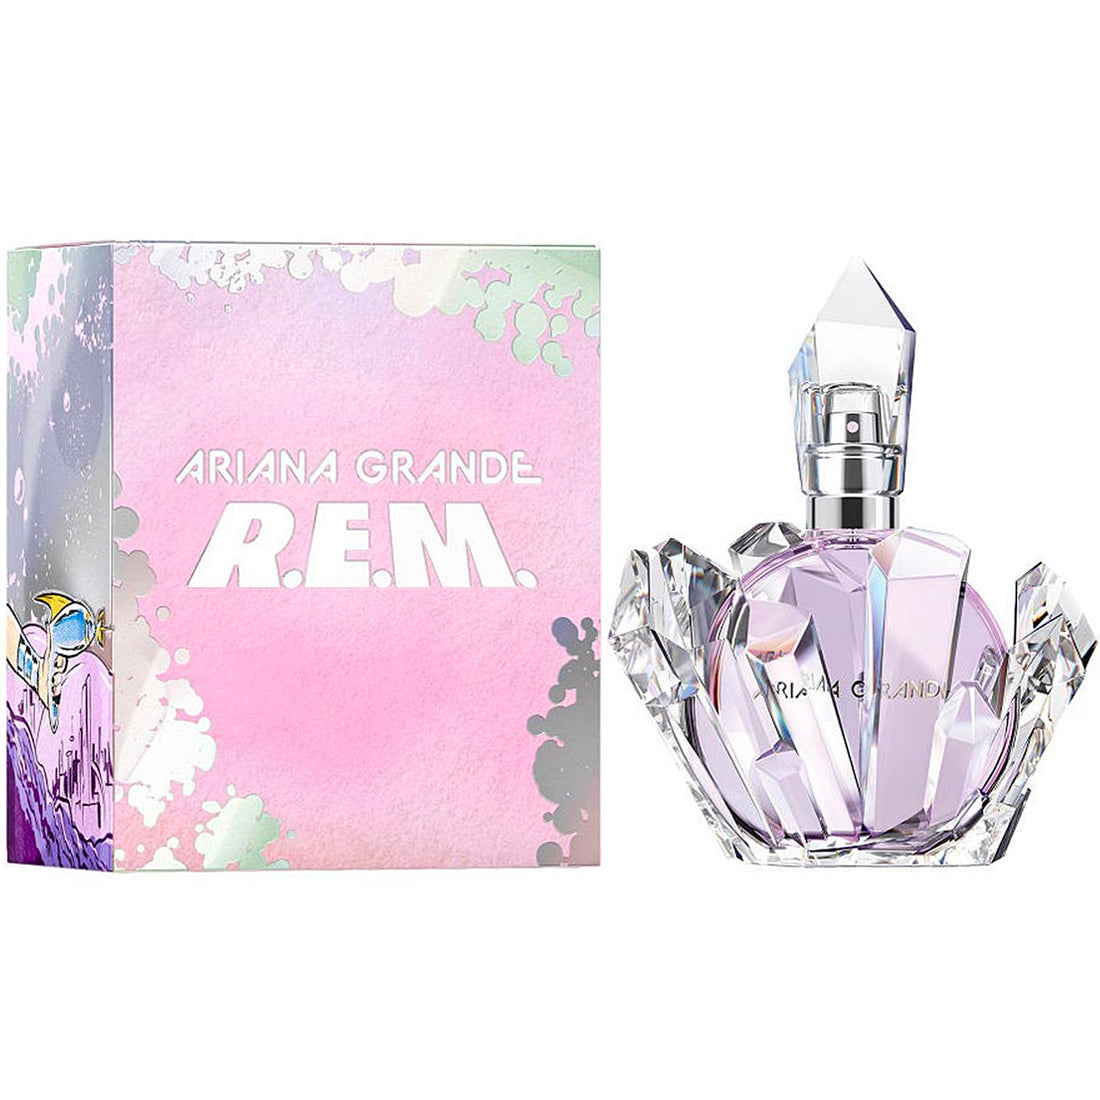 <span data-mce-fragment="1">Exclusive R.E.M., the dreamy fragrance by ARIANA GRANDE. An intergalactic dream of femininity and power, R.E.M. draws you in with a cosmic blend of Juicy Fig and Warm Salted Caramel. Lavender essence takes you to dreamy new heights, while sparkling Pear Blossom explodes like a supernova in the night sky. Intoxicating Musk wrapped with Sandalwood creates the perfect ending to your unforgettable journey.</span>